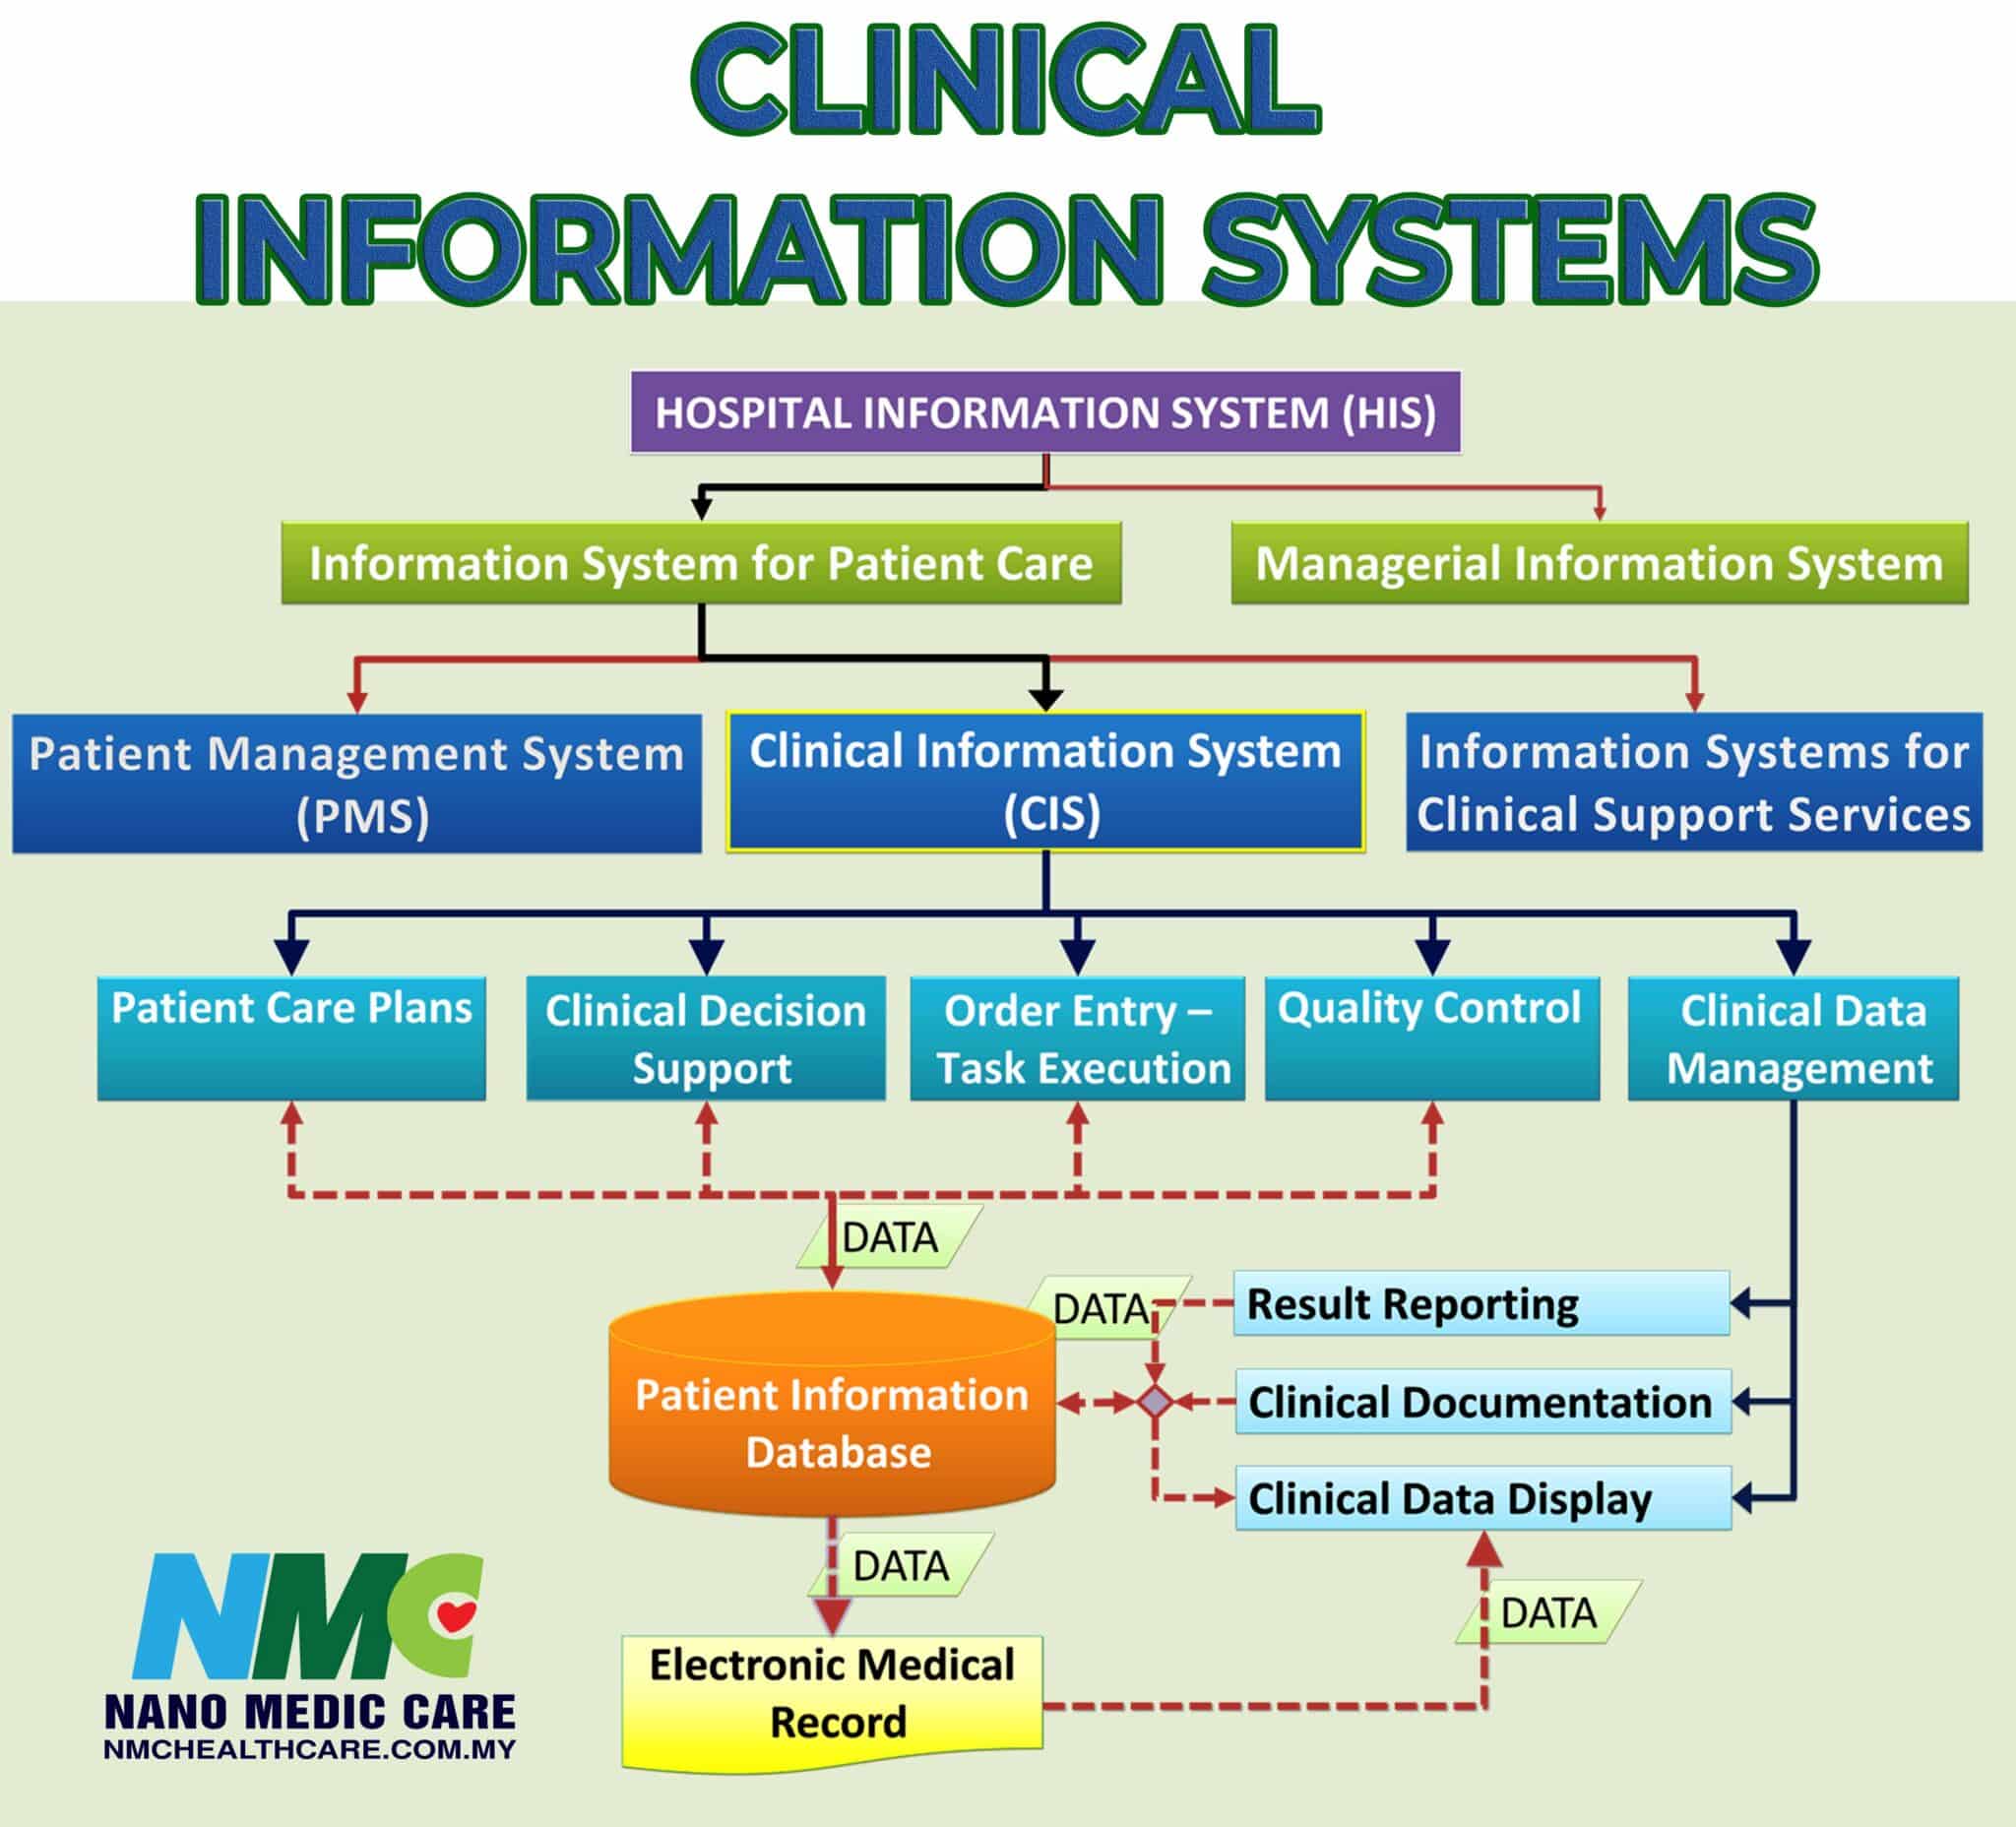 clinical research informatics examples